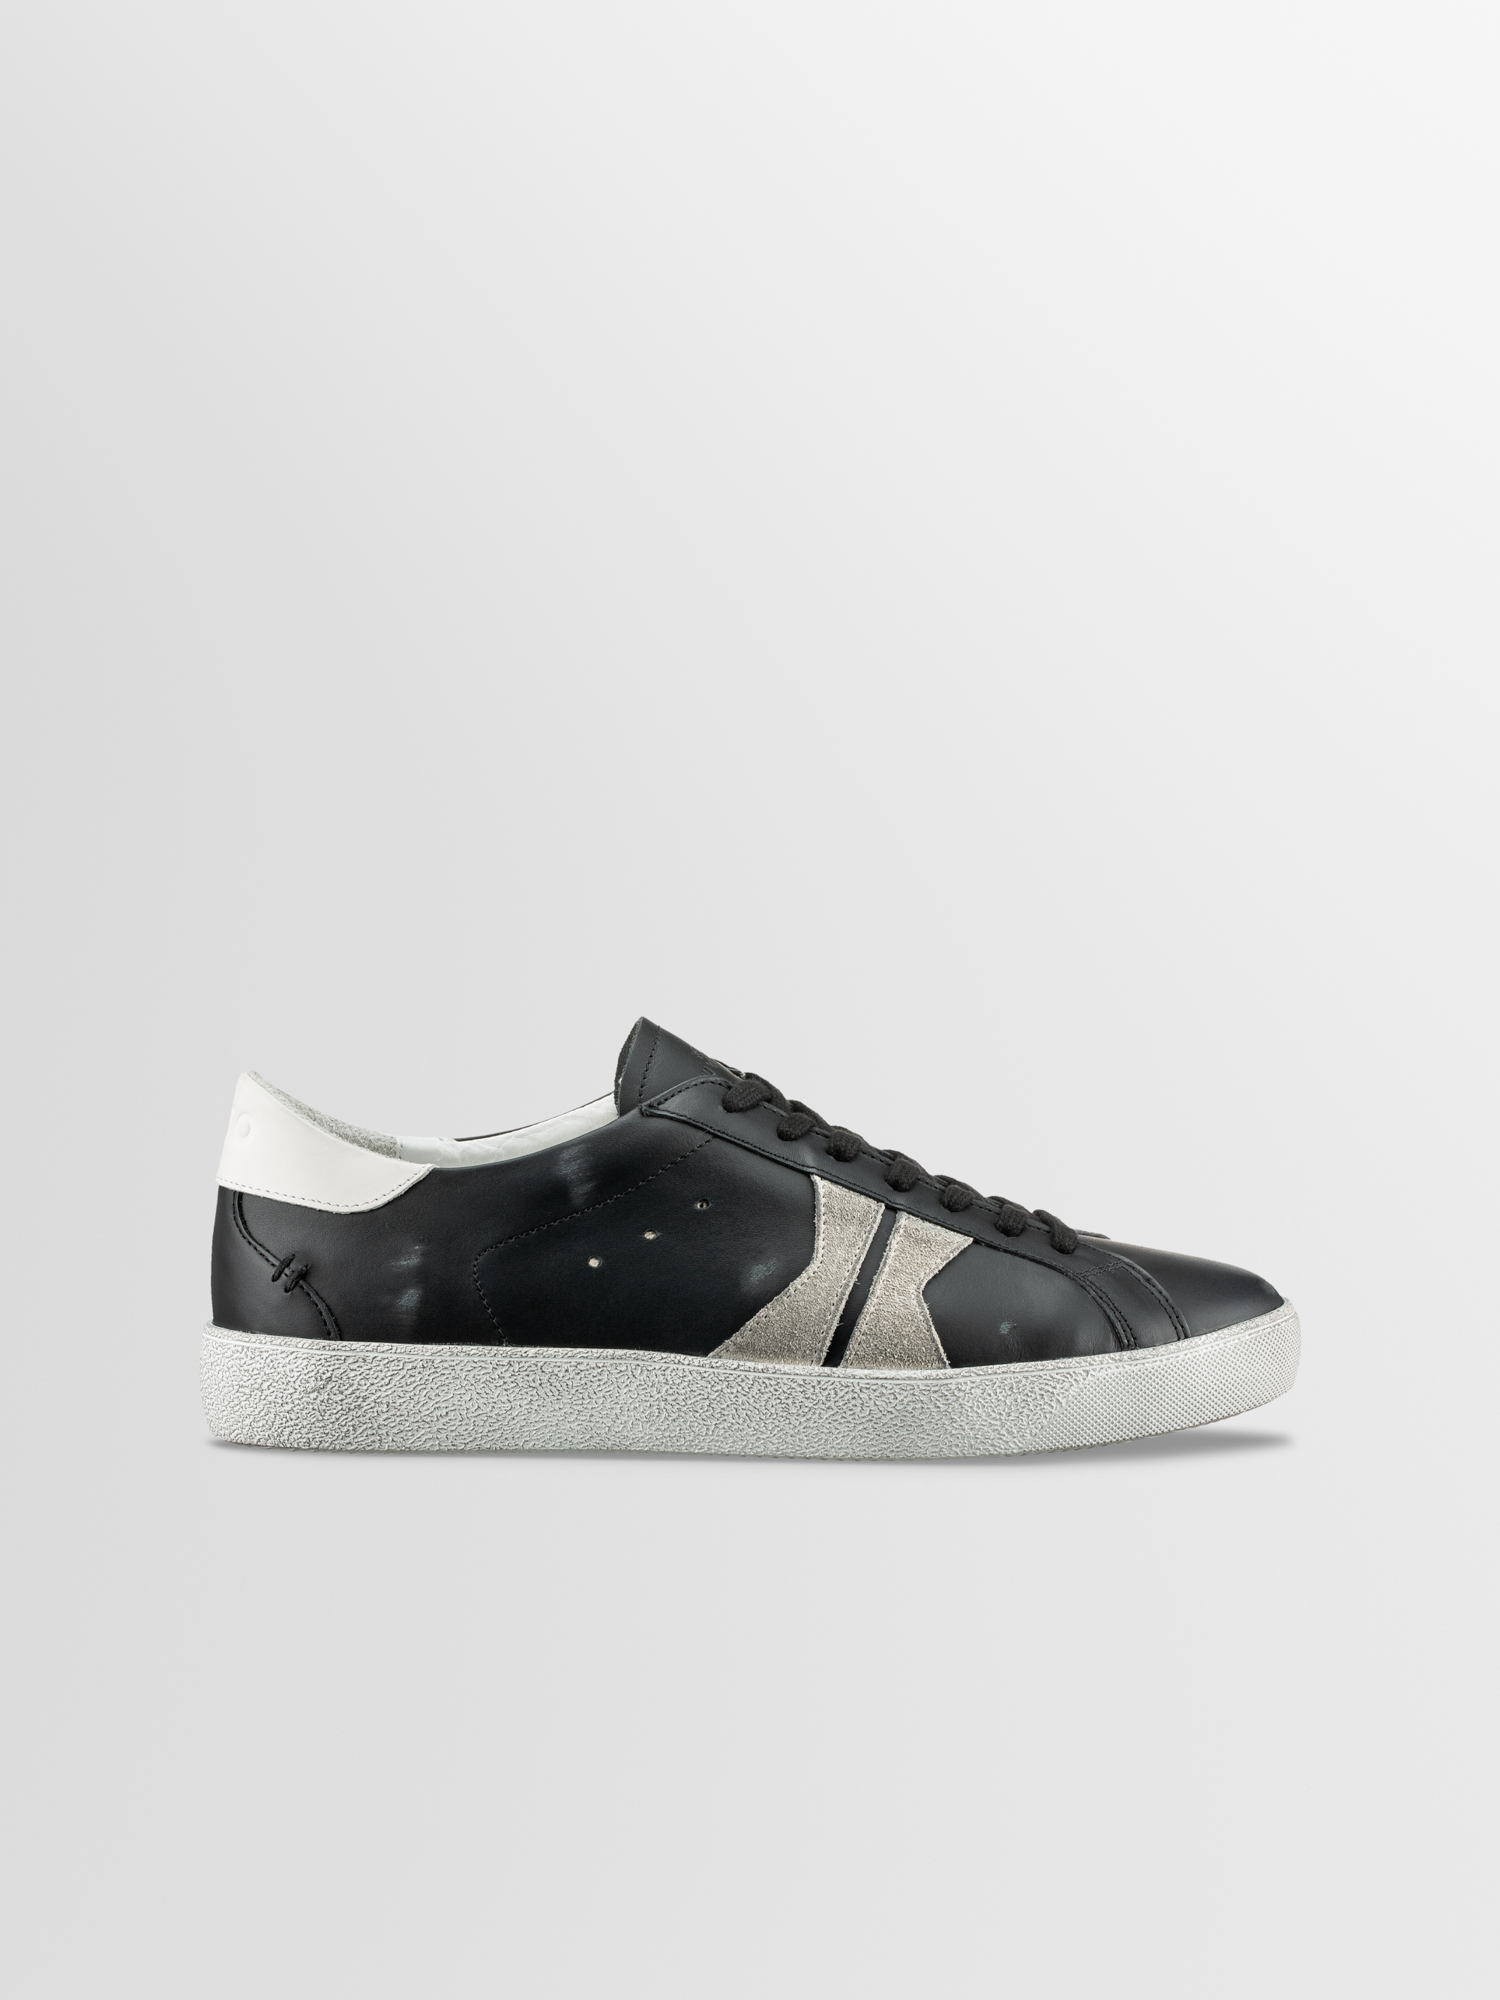 Men's Distressed Low-top Leather Sneakers, Fabro in Black Ice